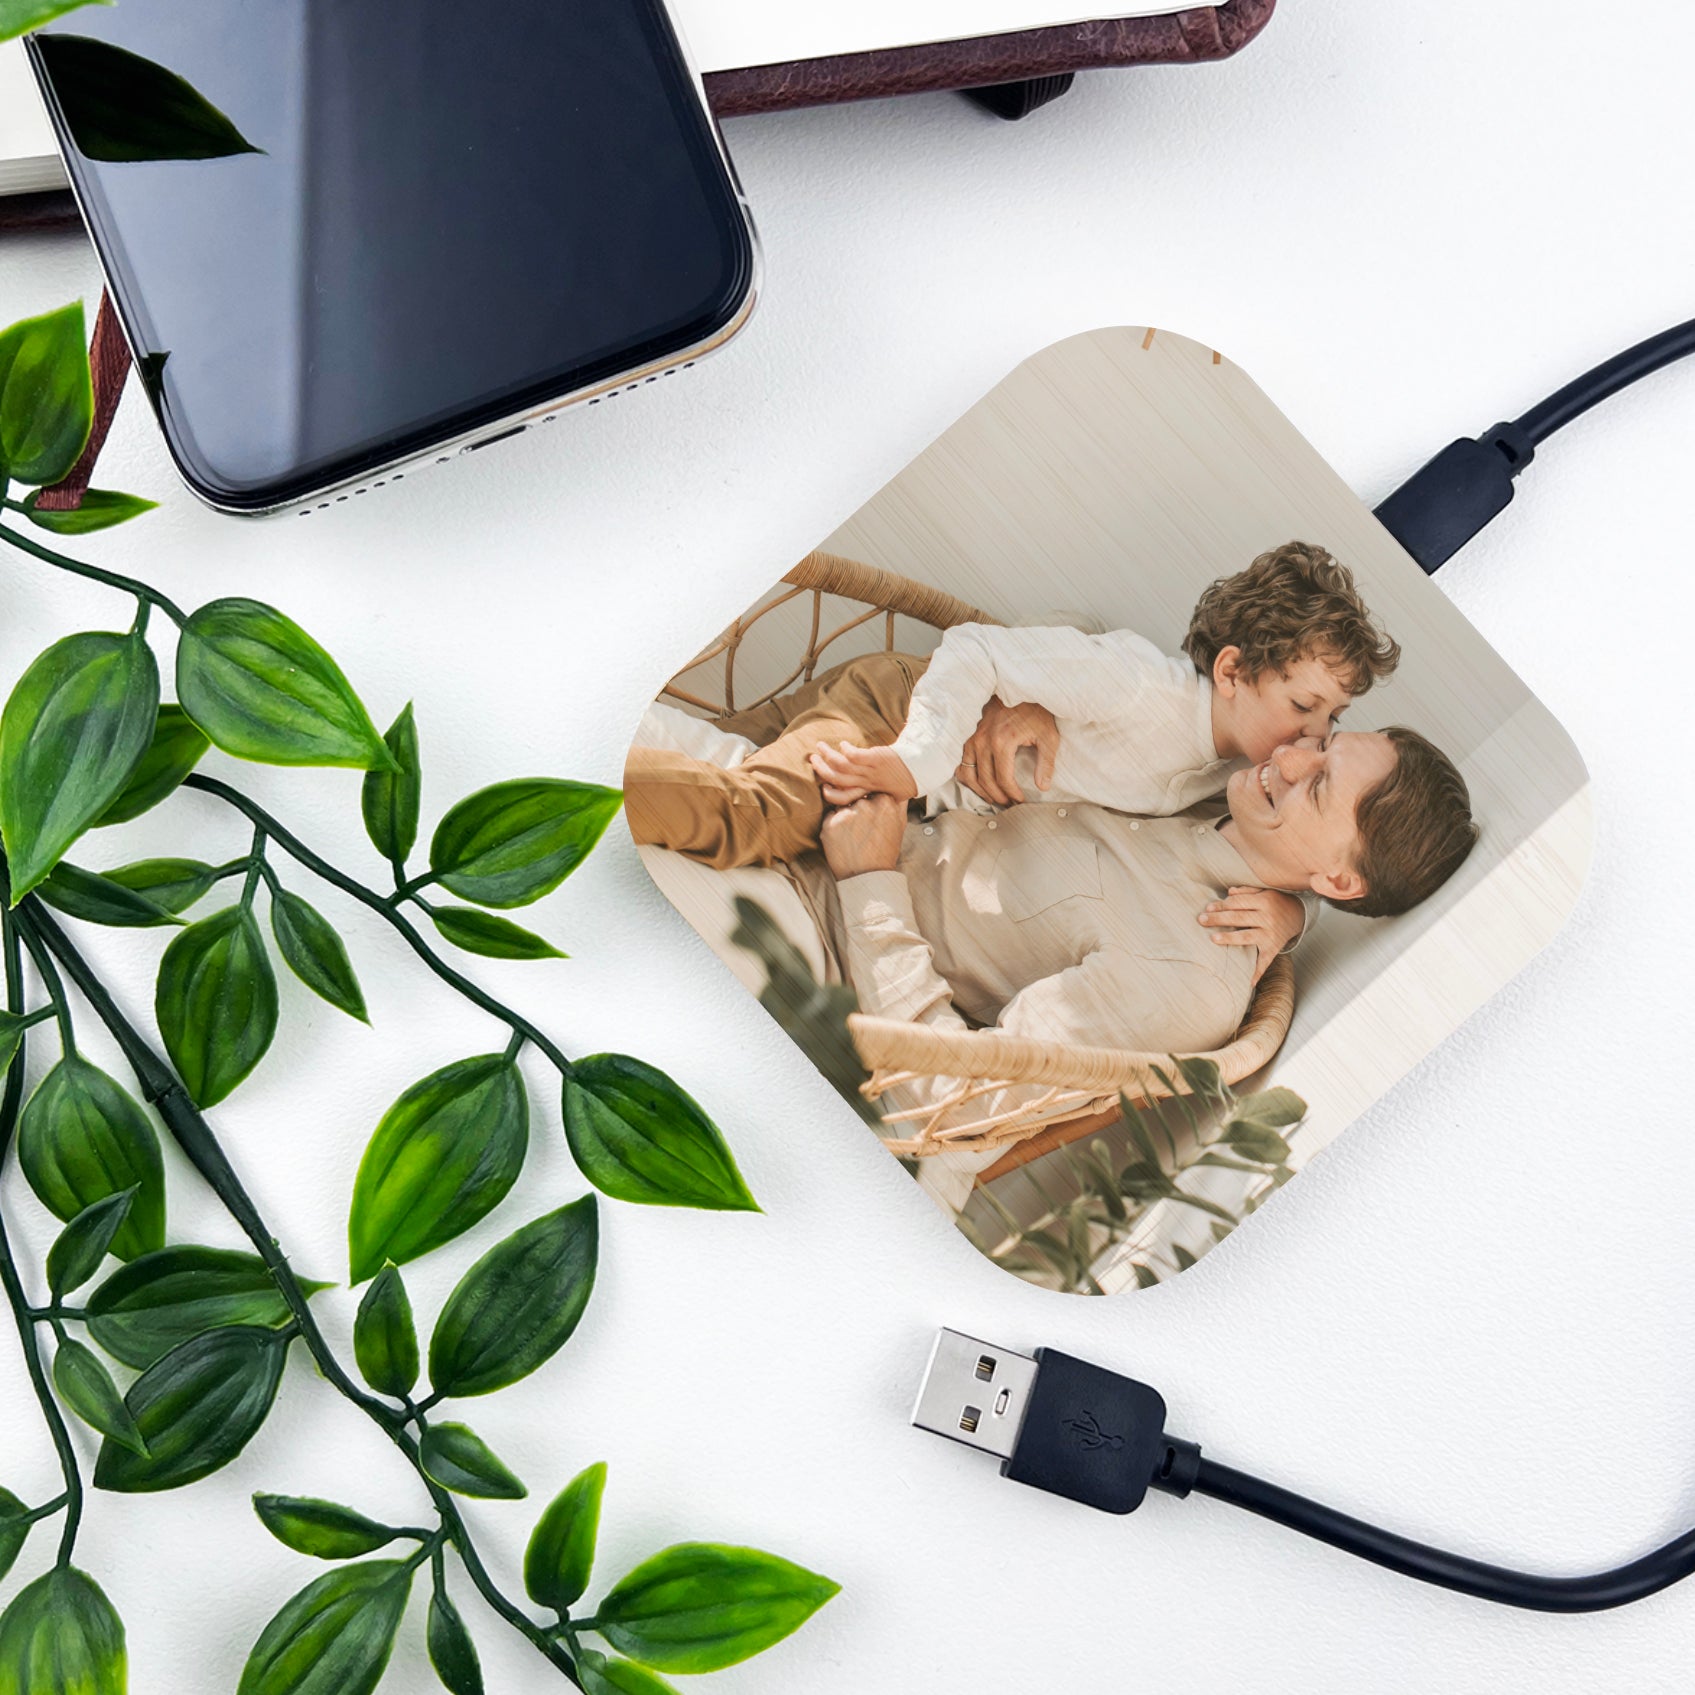 Photo Wireless Mobile Phone Charger